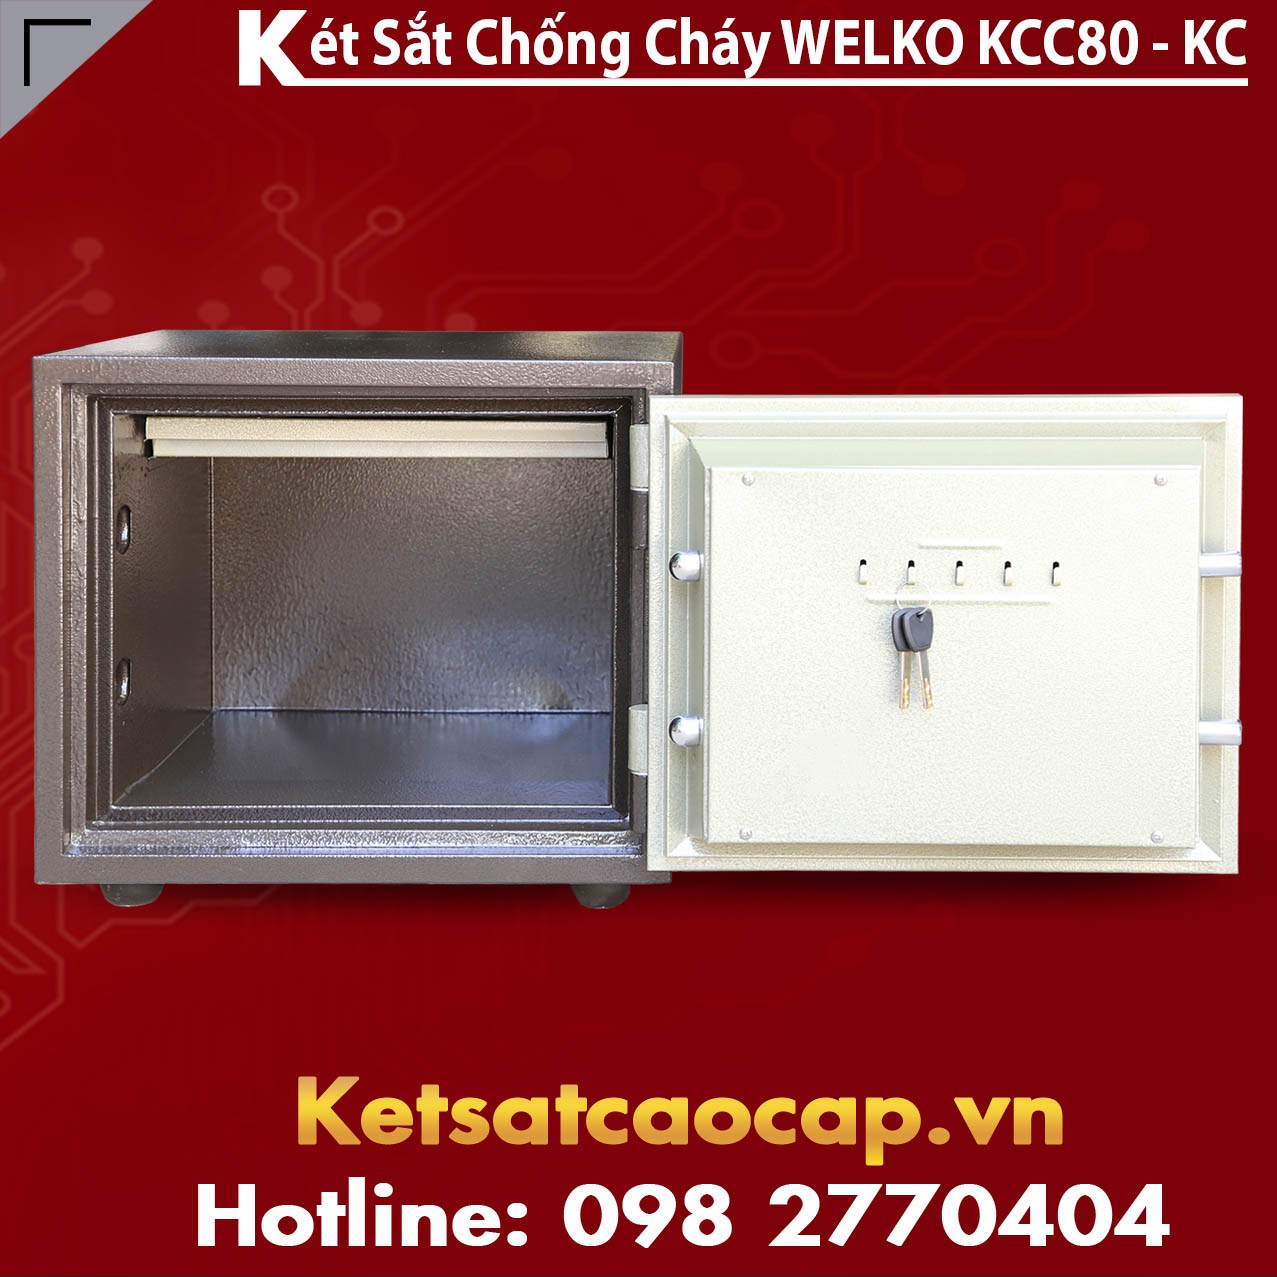 Burglary Fire Safes Manufacturers High Quality Factory Price Co So San Xuat Ket Sat Mini Han Quoc Chinh Hang